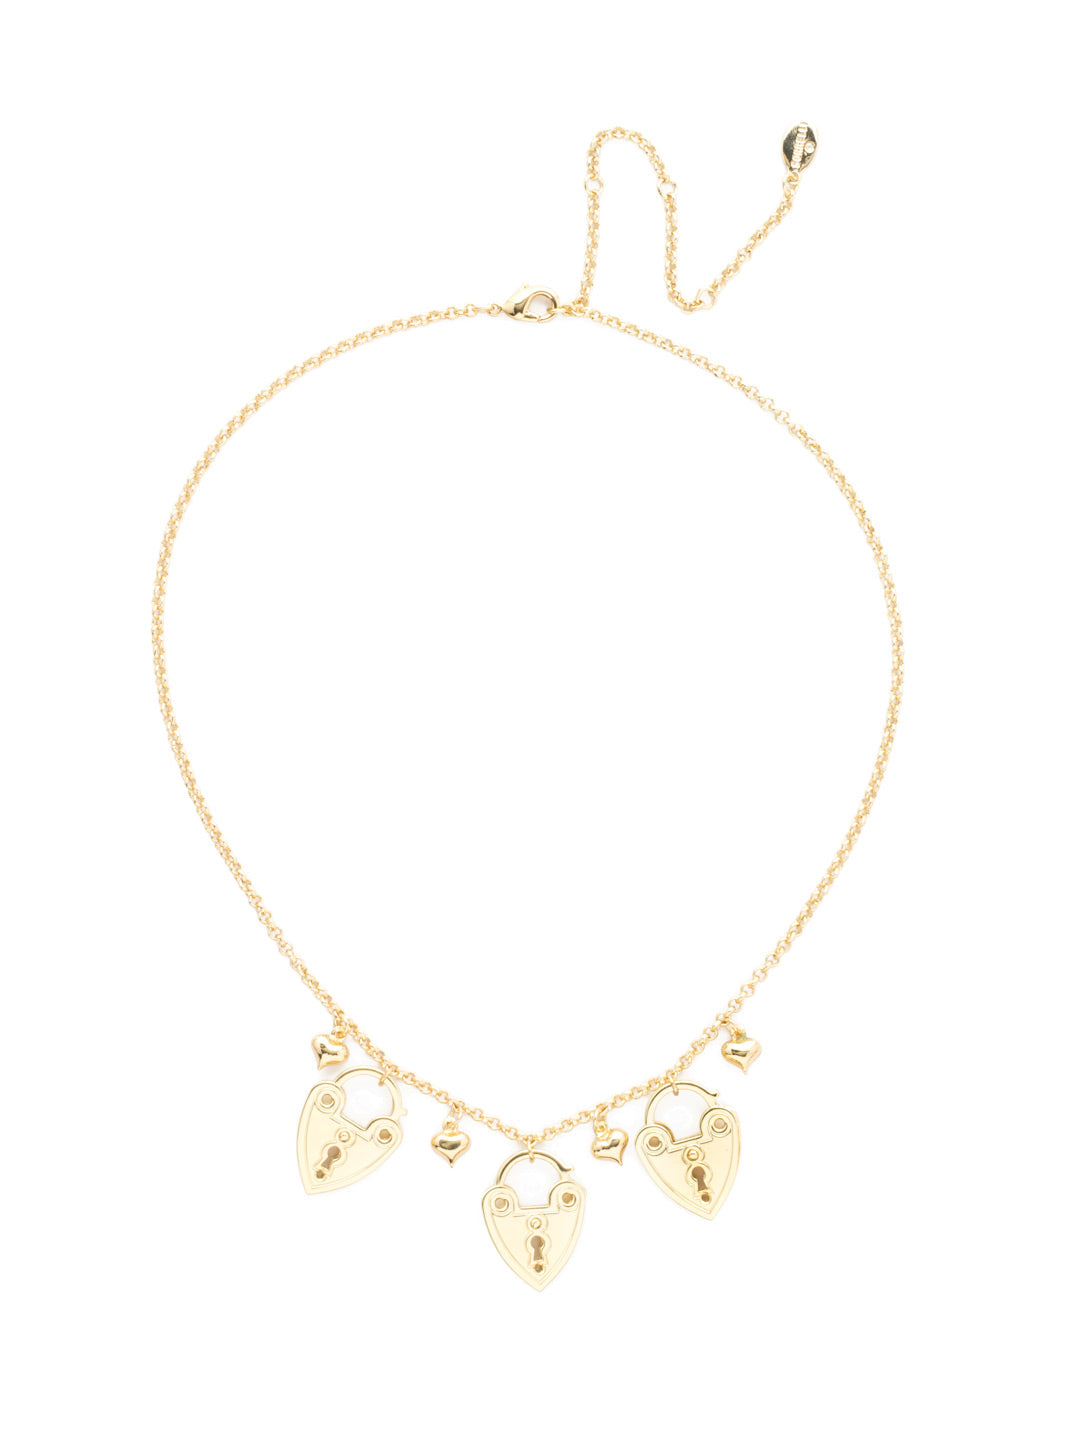 Celestiel Necklace - NEC27BGPLP - <p>Under lock and key! This lovely line necklace showcases dainty heart charms and metal heart lockets on a subtle chain. From Sorrelli's Polished Pearl collection in our Bright Gold-tone finish.</p>